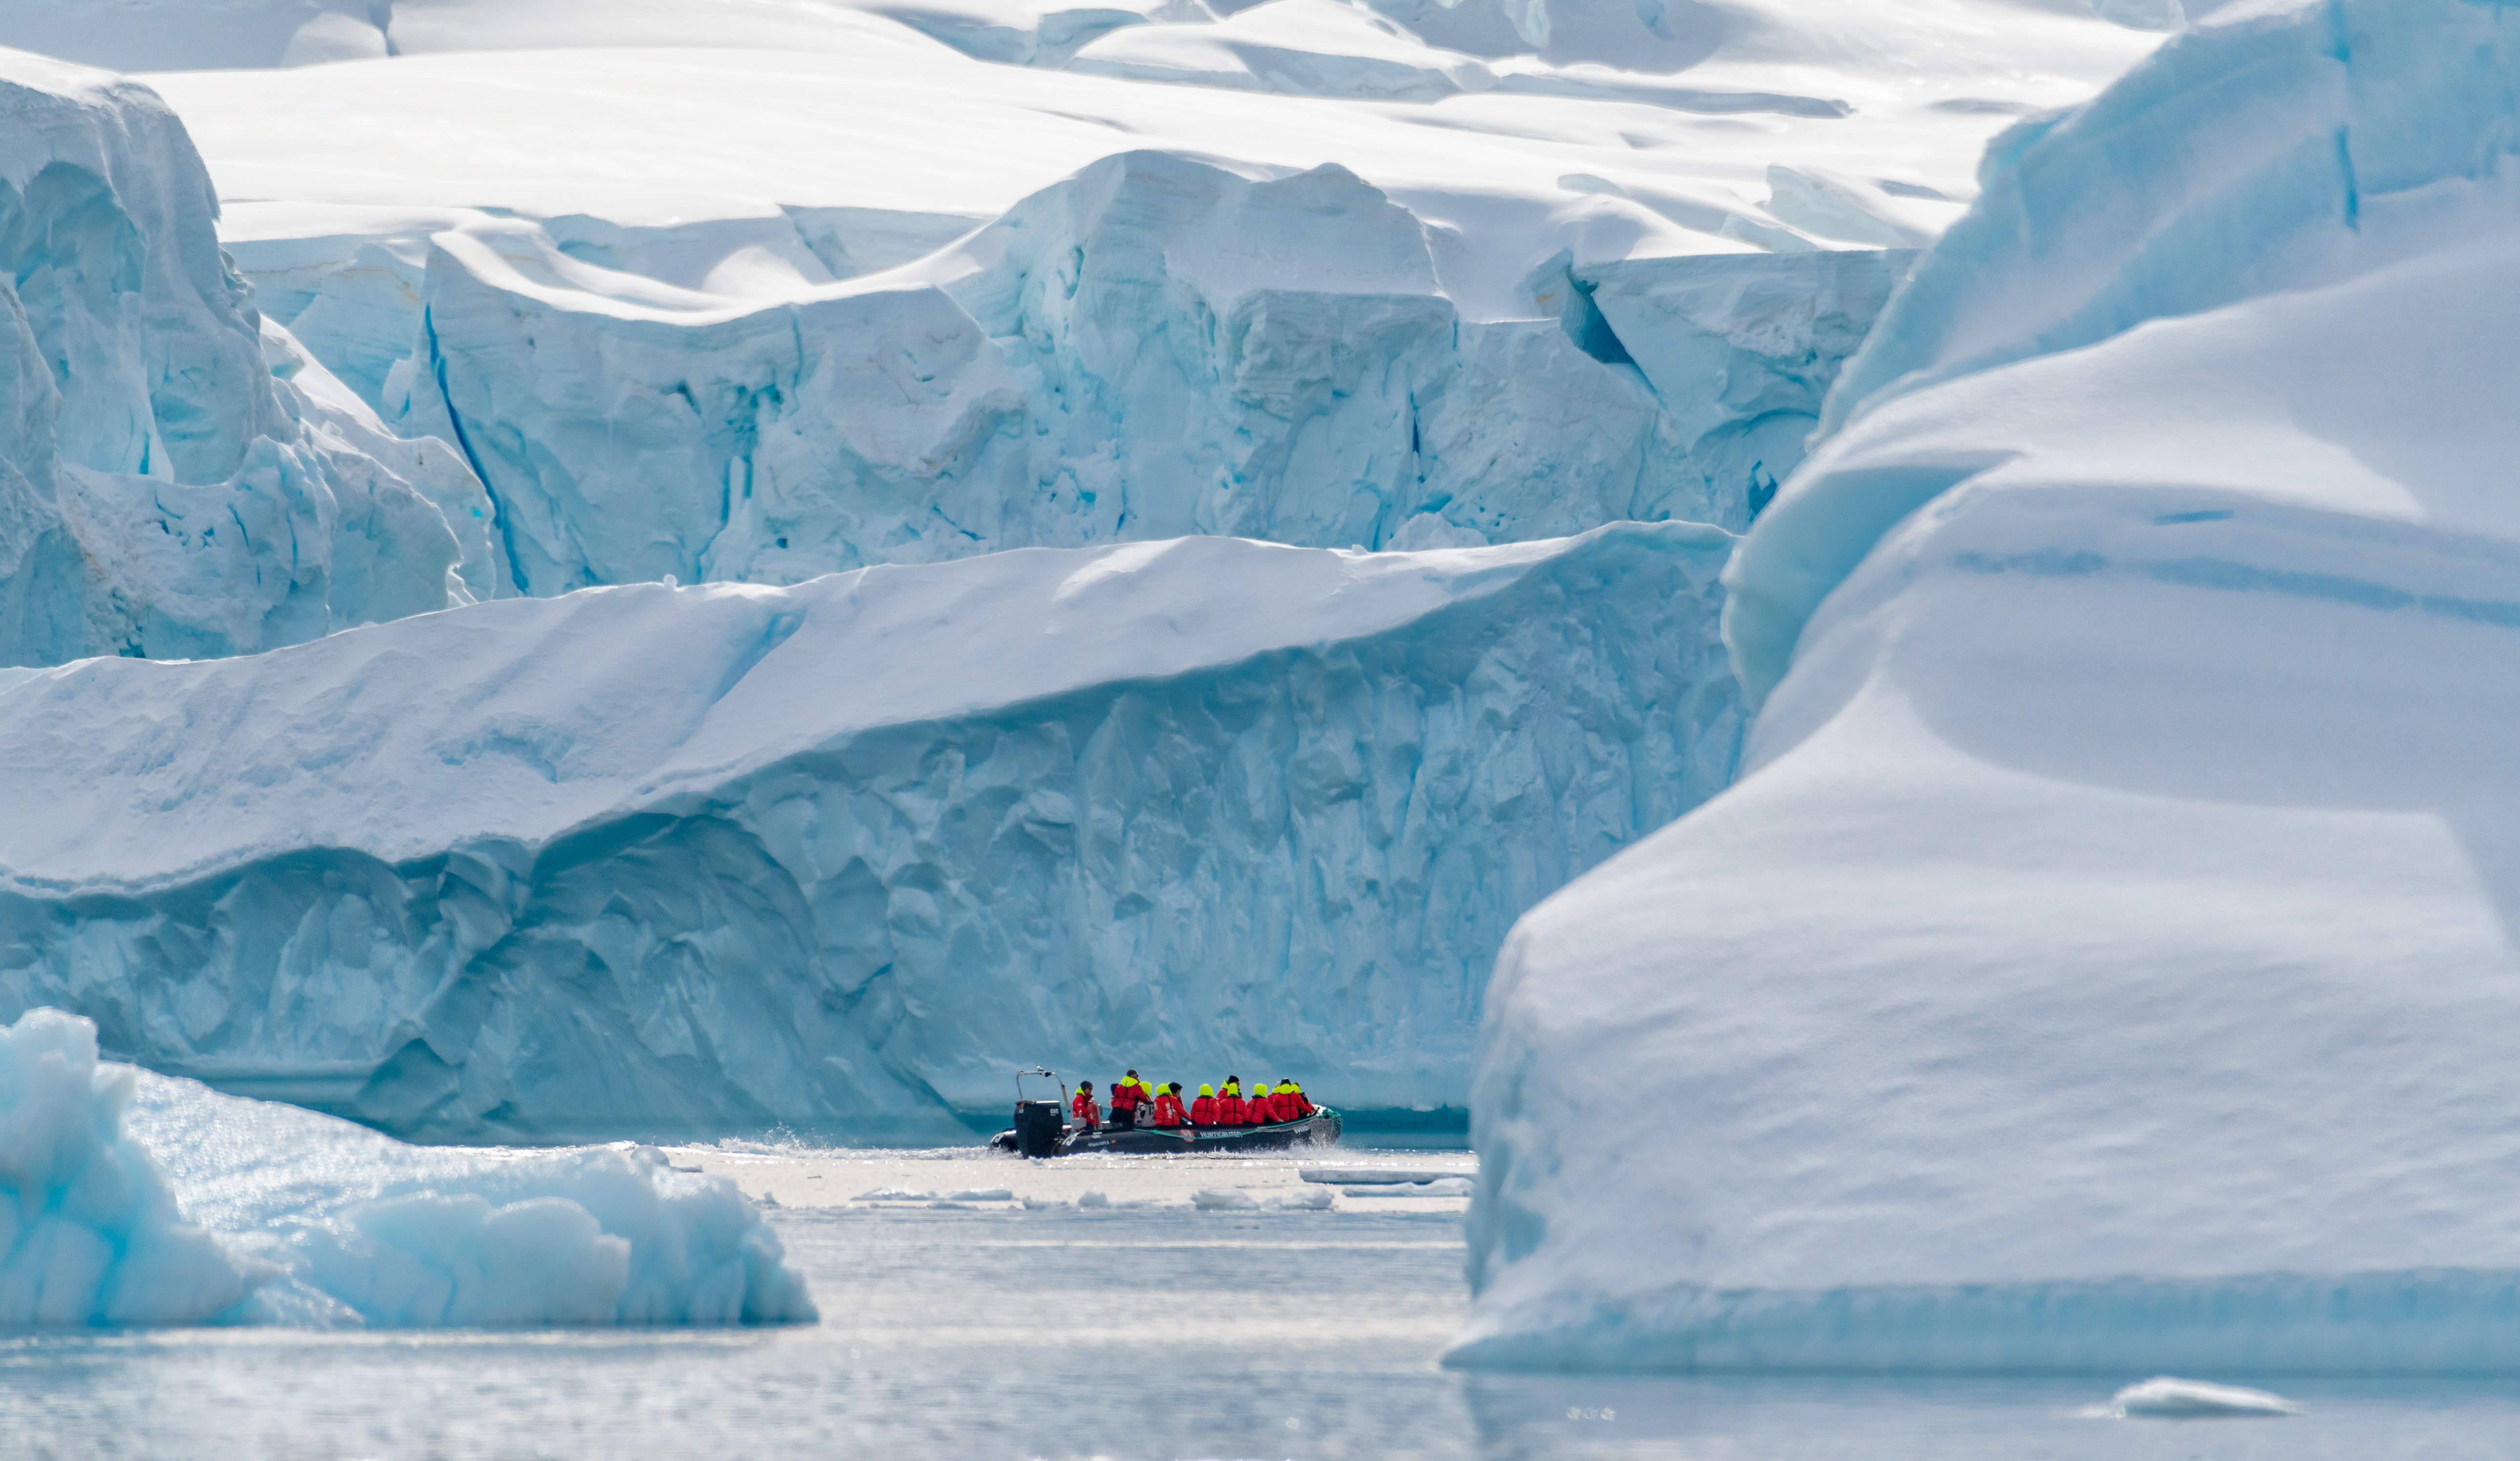 Holiday in Antarctica and the Falklands for 19 days for $14,490 including flights